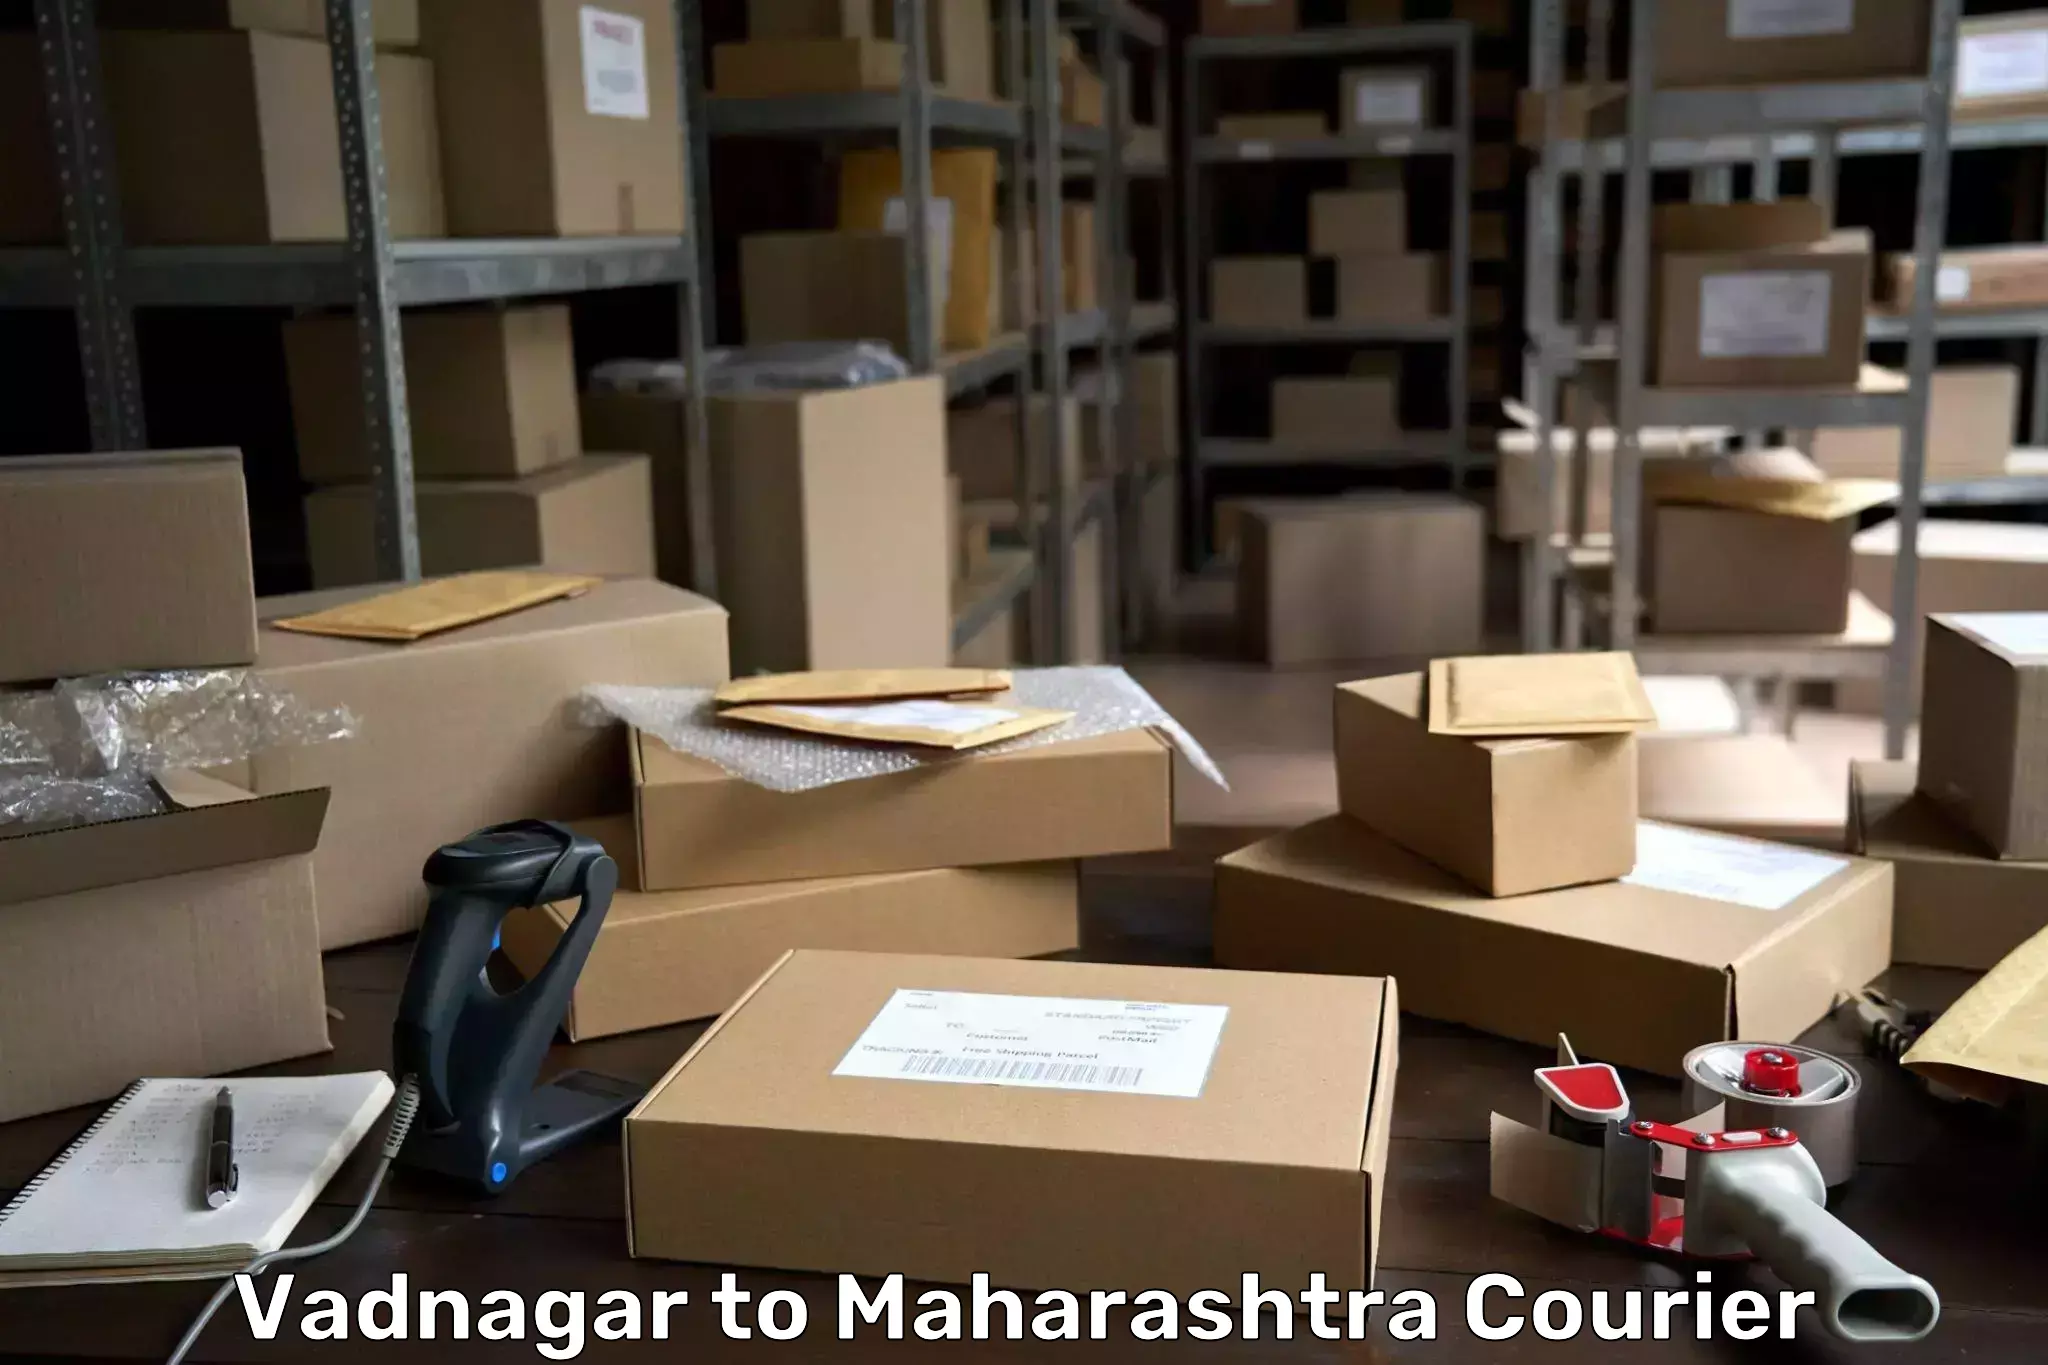 Sustainable courier practices Vadnagar to Maharashtra